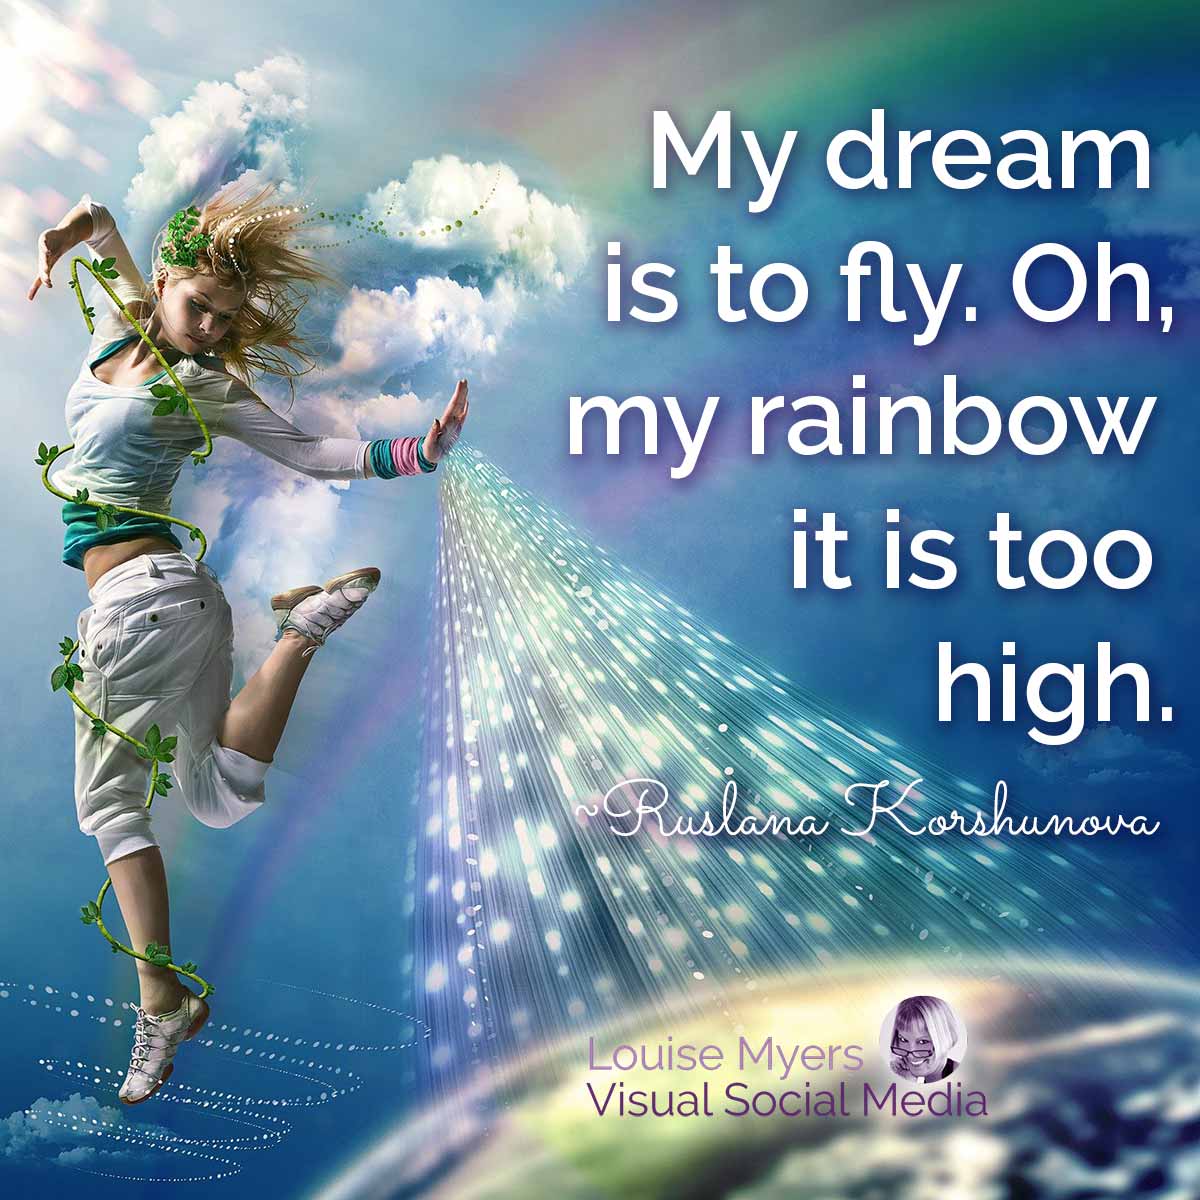 girl flying through rainbows has quote, My dream is to fly, my rainbow is too high.